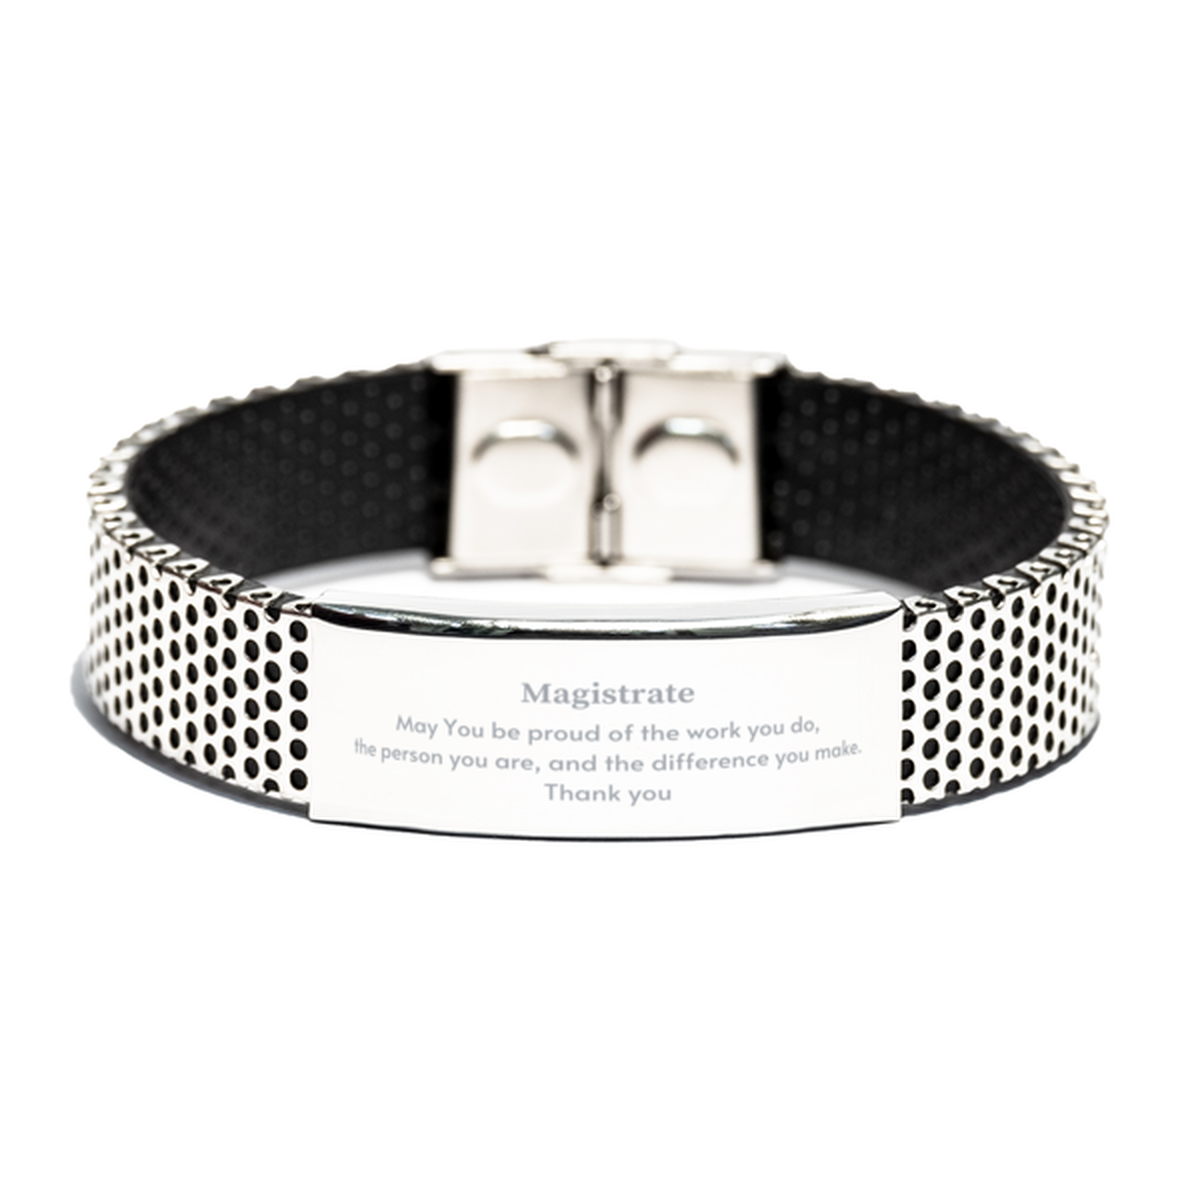 Heartwarming Stainless Steel Bracelet Retirement Coworkers Gifts for Magistrate, Magistrate May You be proud of the work you do, the person you are Gifts for Boss Men Women Friends